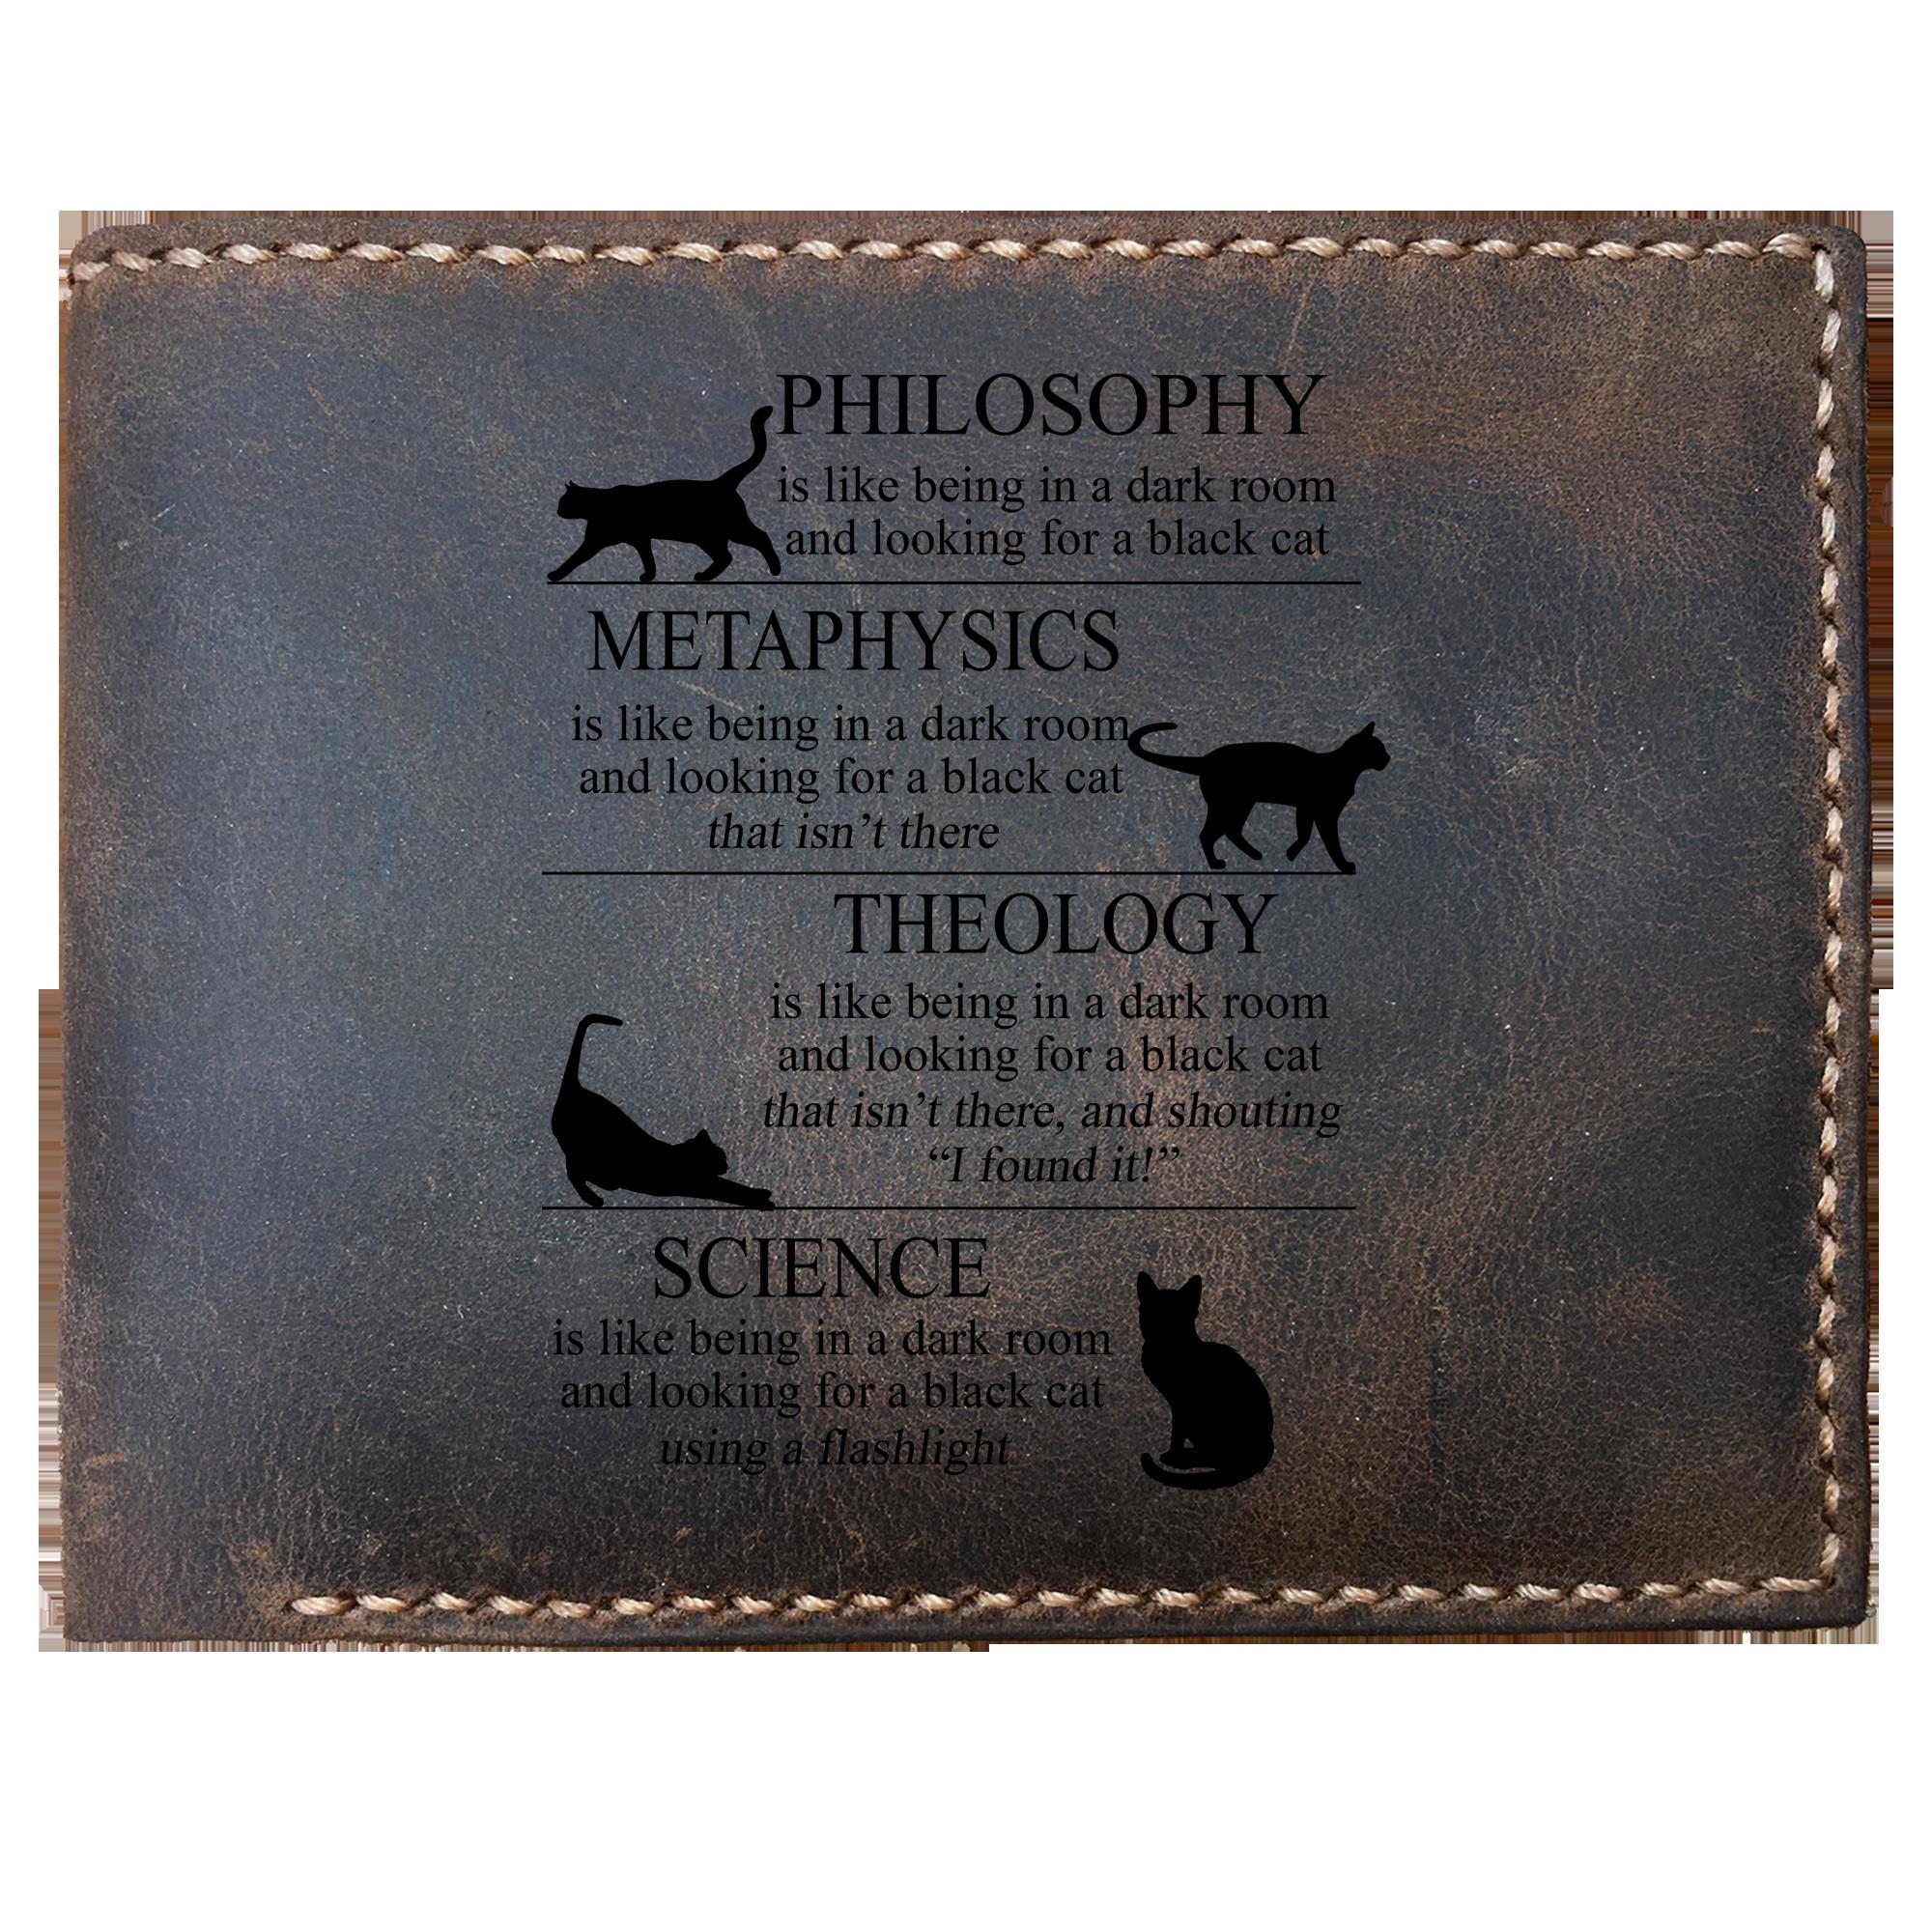 Skitongifts Funny Custom Laser Engraved Bifold Leather Wallet For Men, Funny Education Cat Philosophy Science Theology